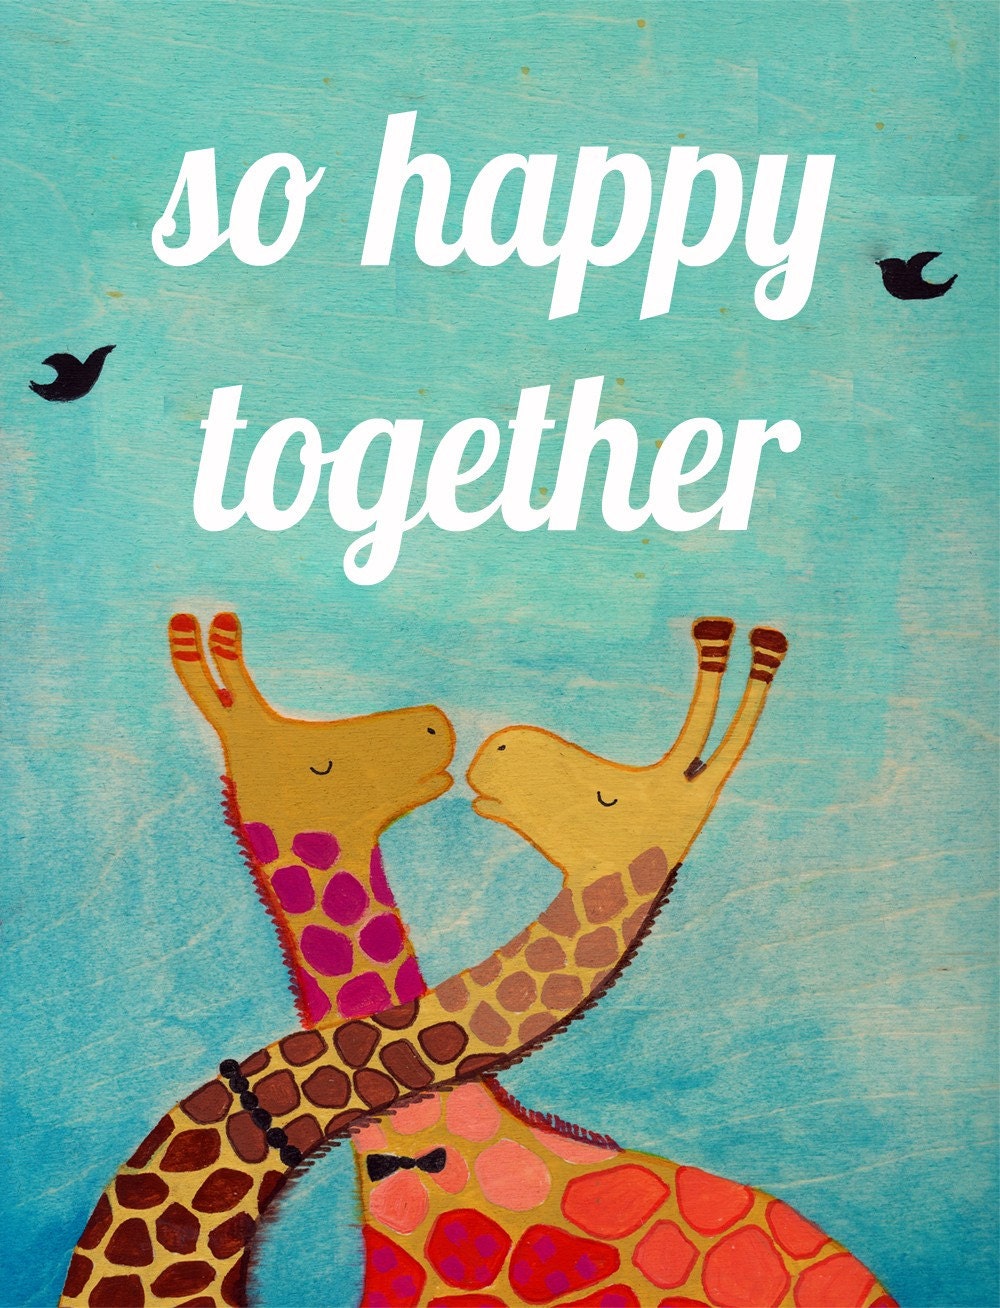 So Happy Together - 8x10 Print